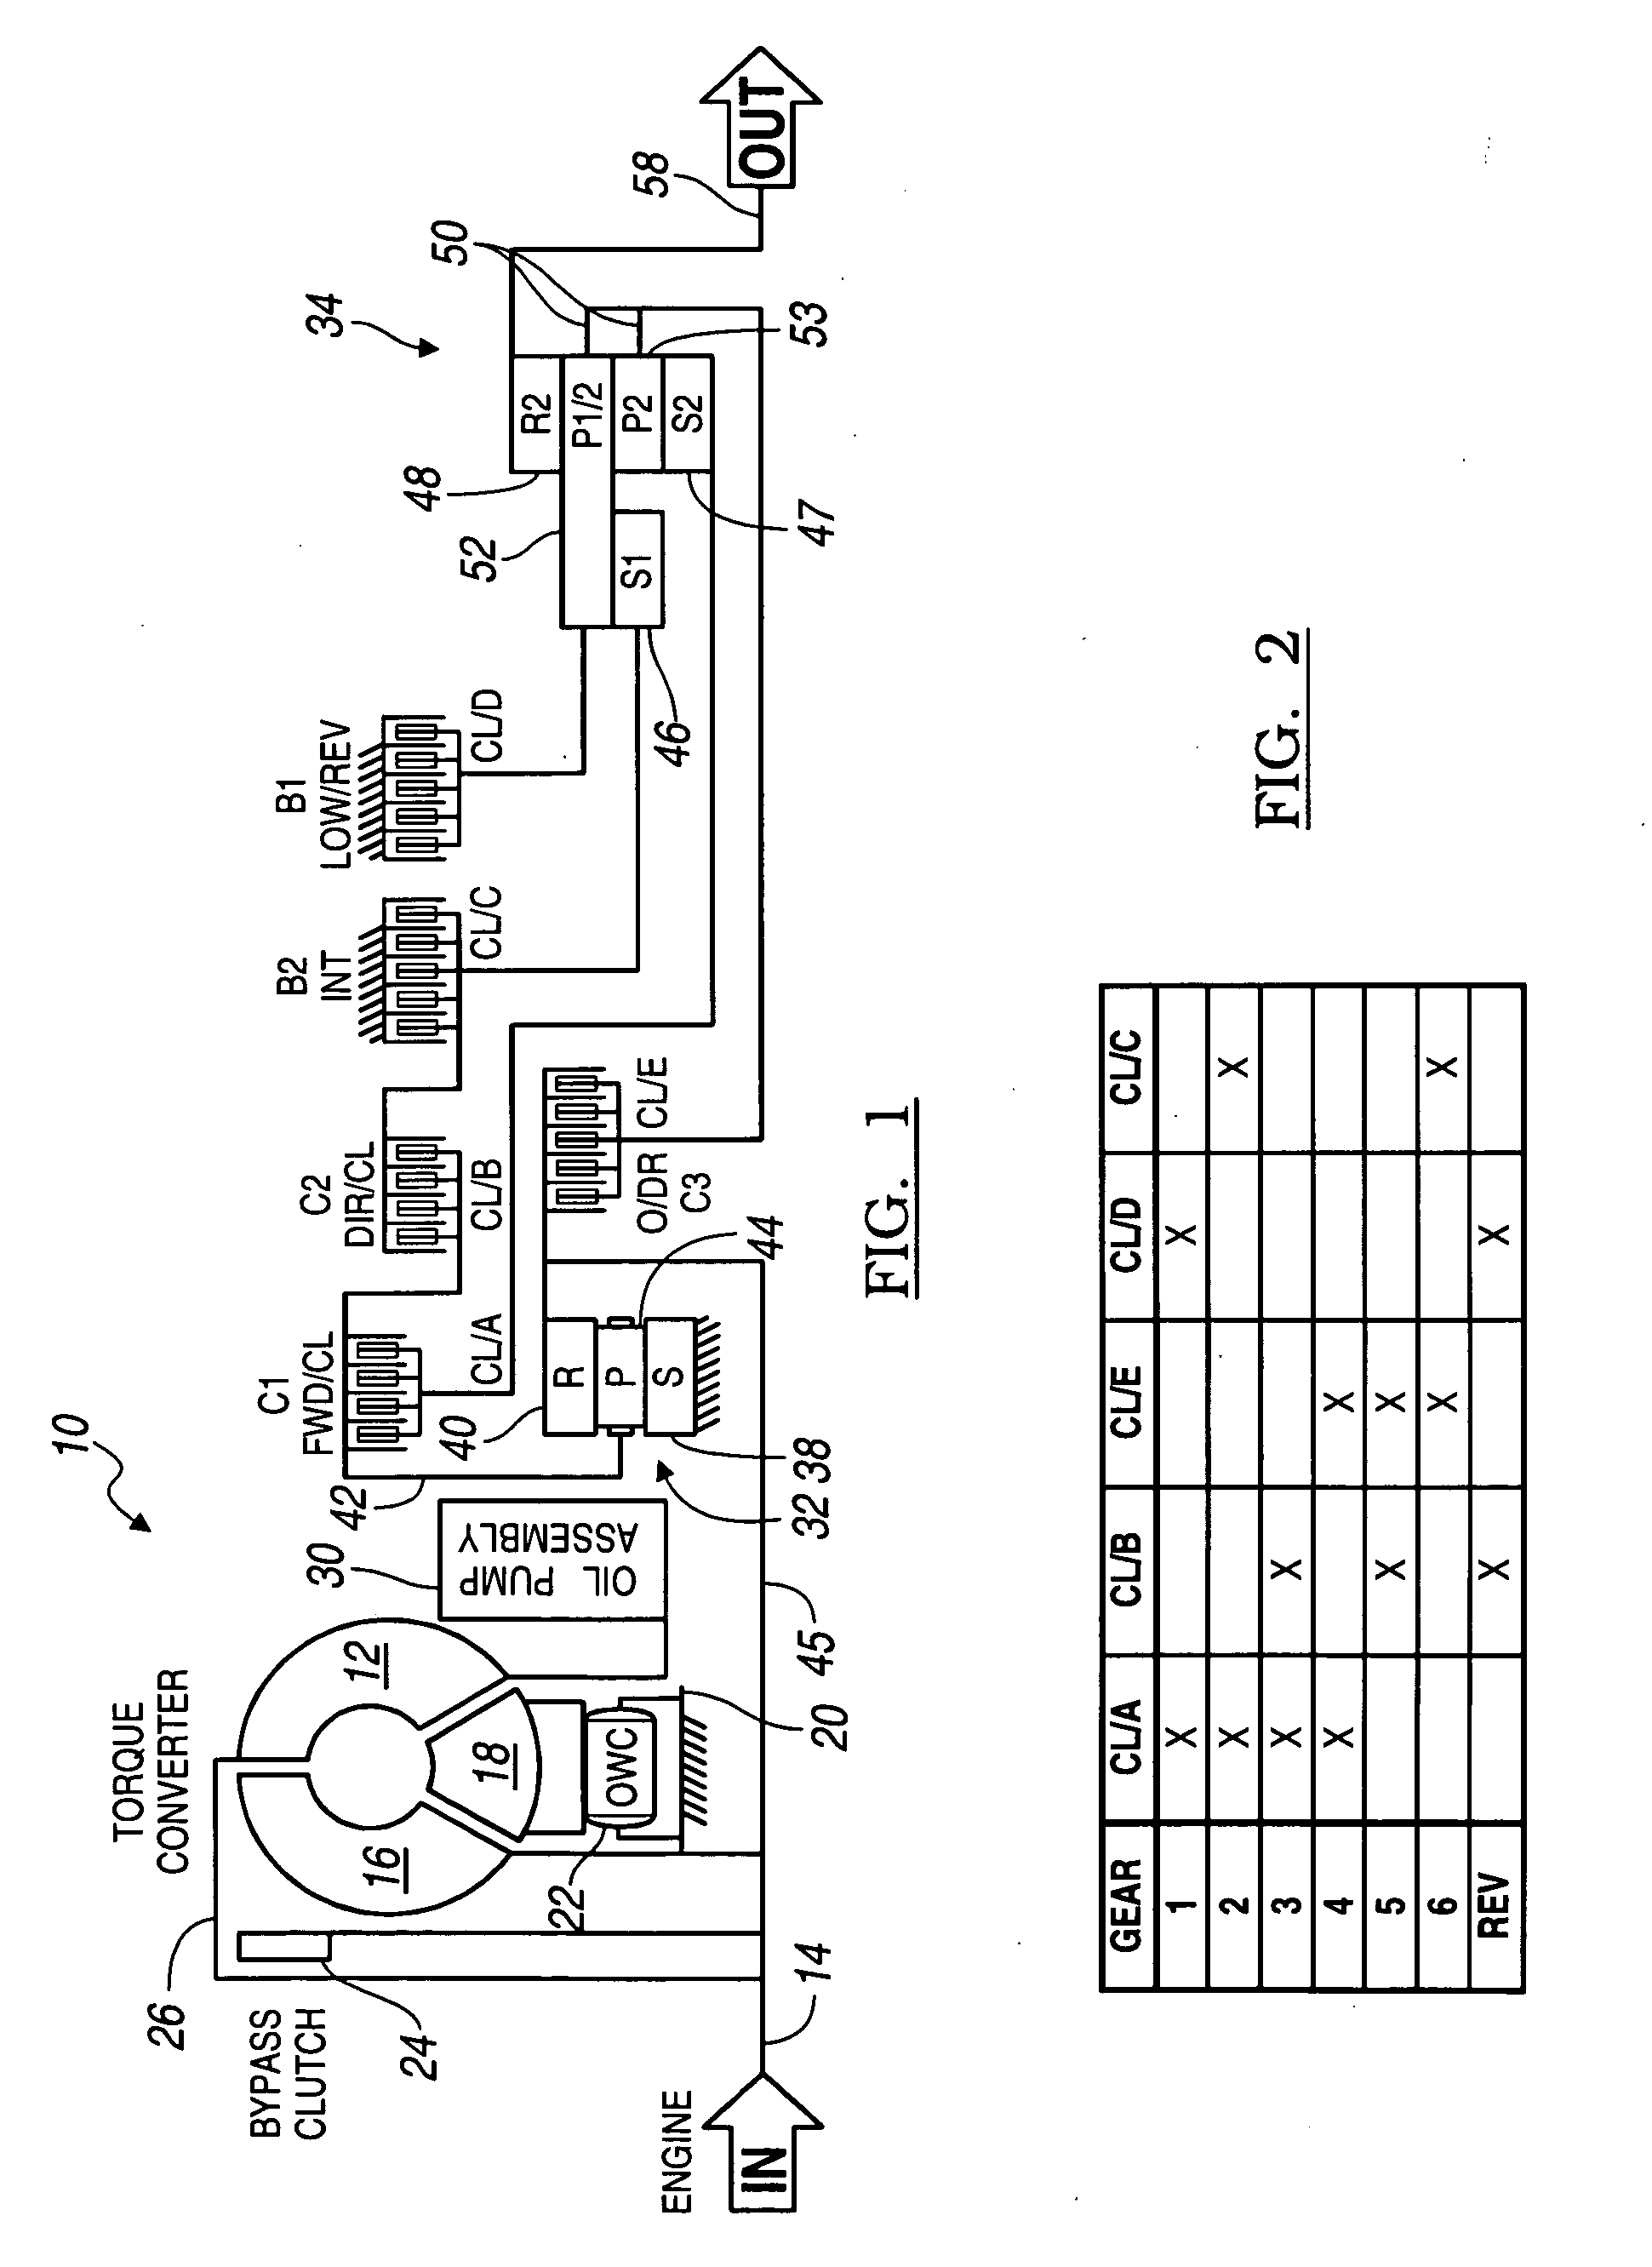 Control of sequential downshifts in a transmission